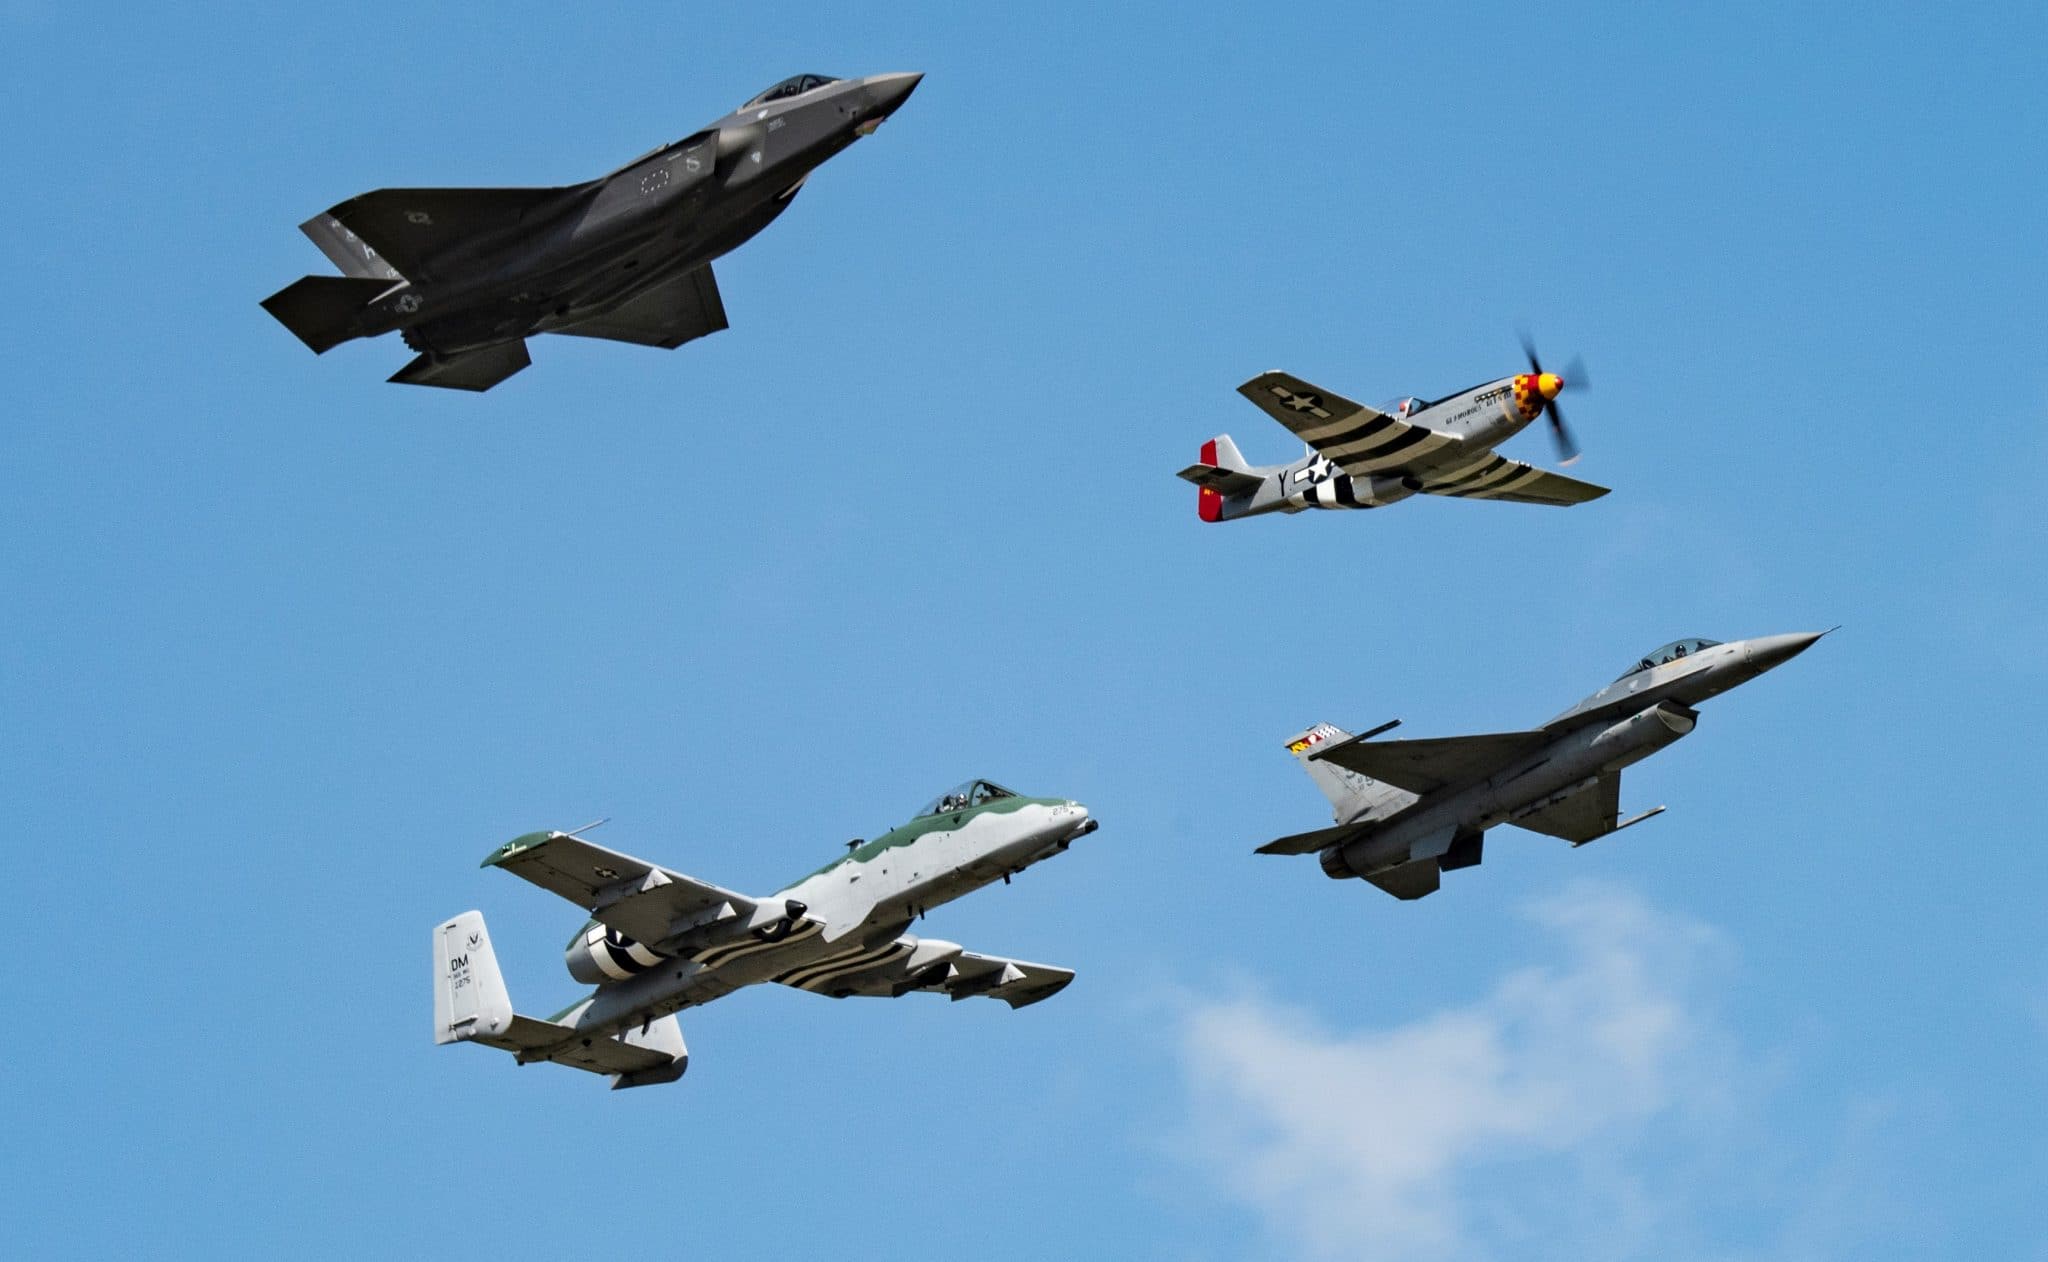 Stuart Airshow to Host Huge Lineup of Military, Civilian Aircraft